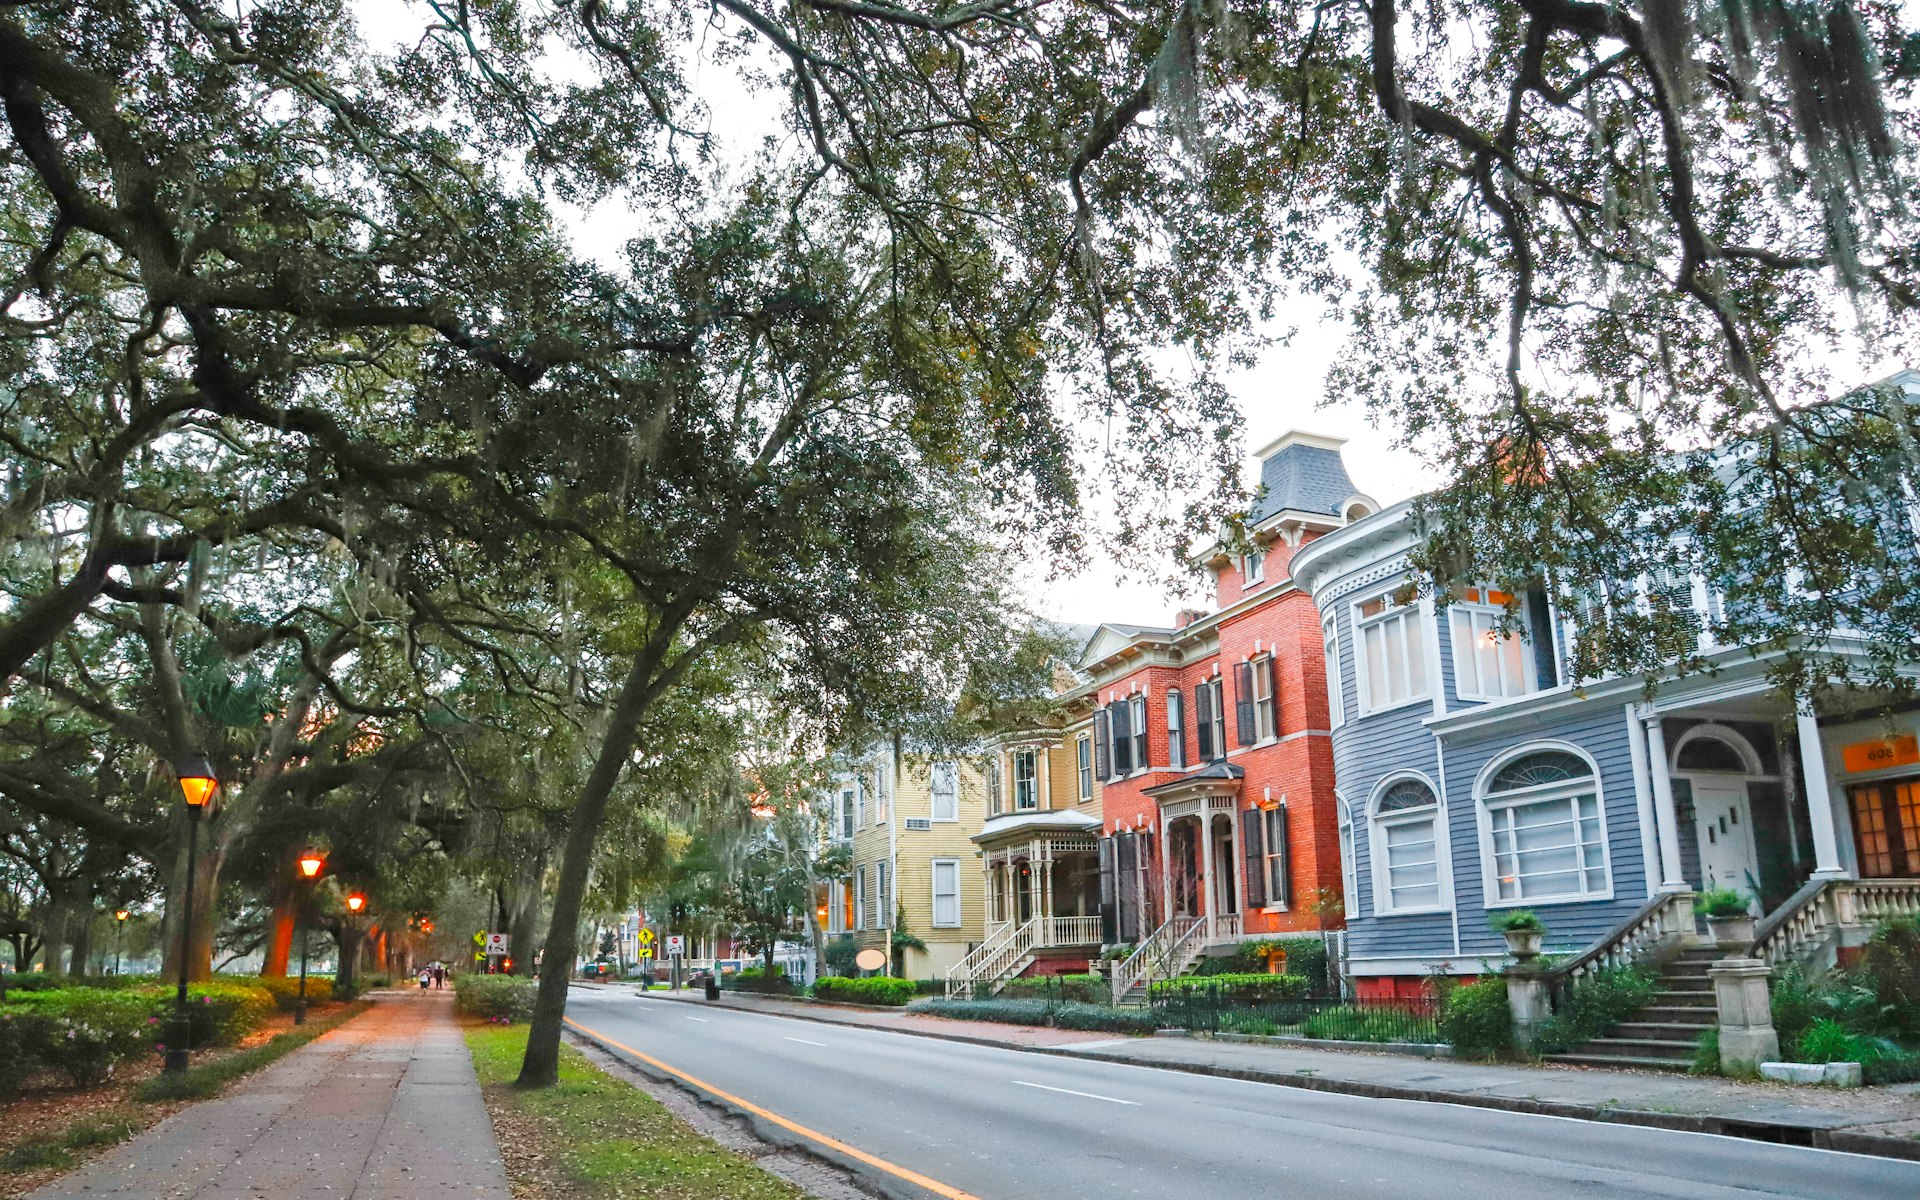 Several candy-colored historic homes sit along a street at dusk in Savannah, Georgia